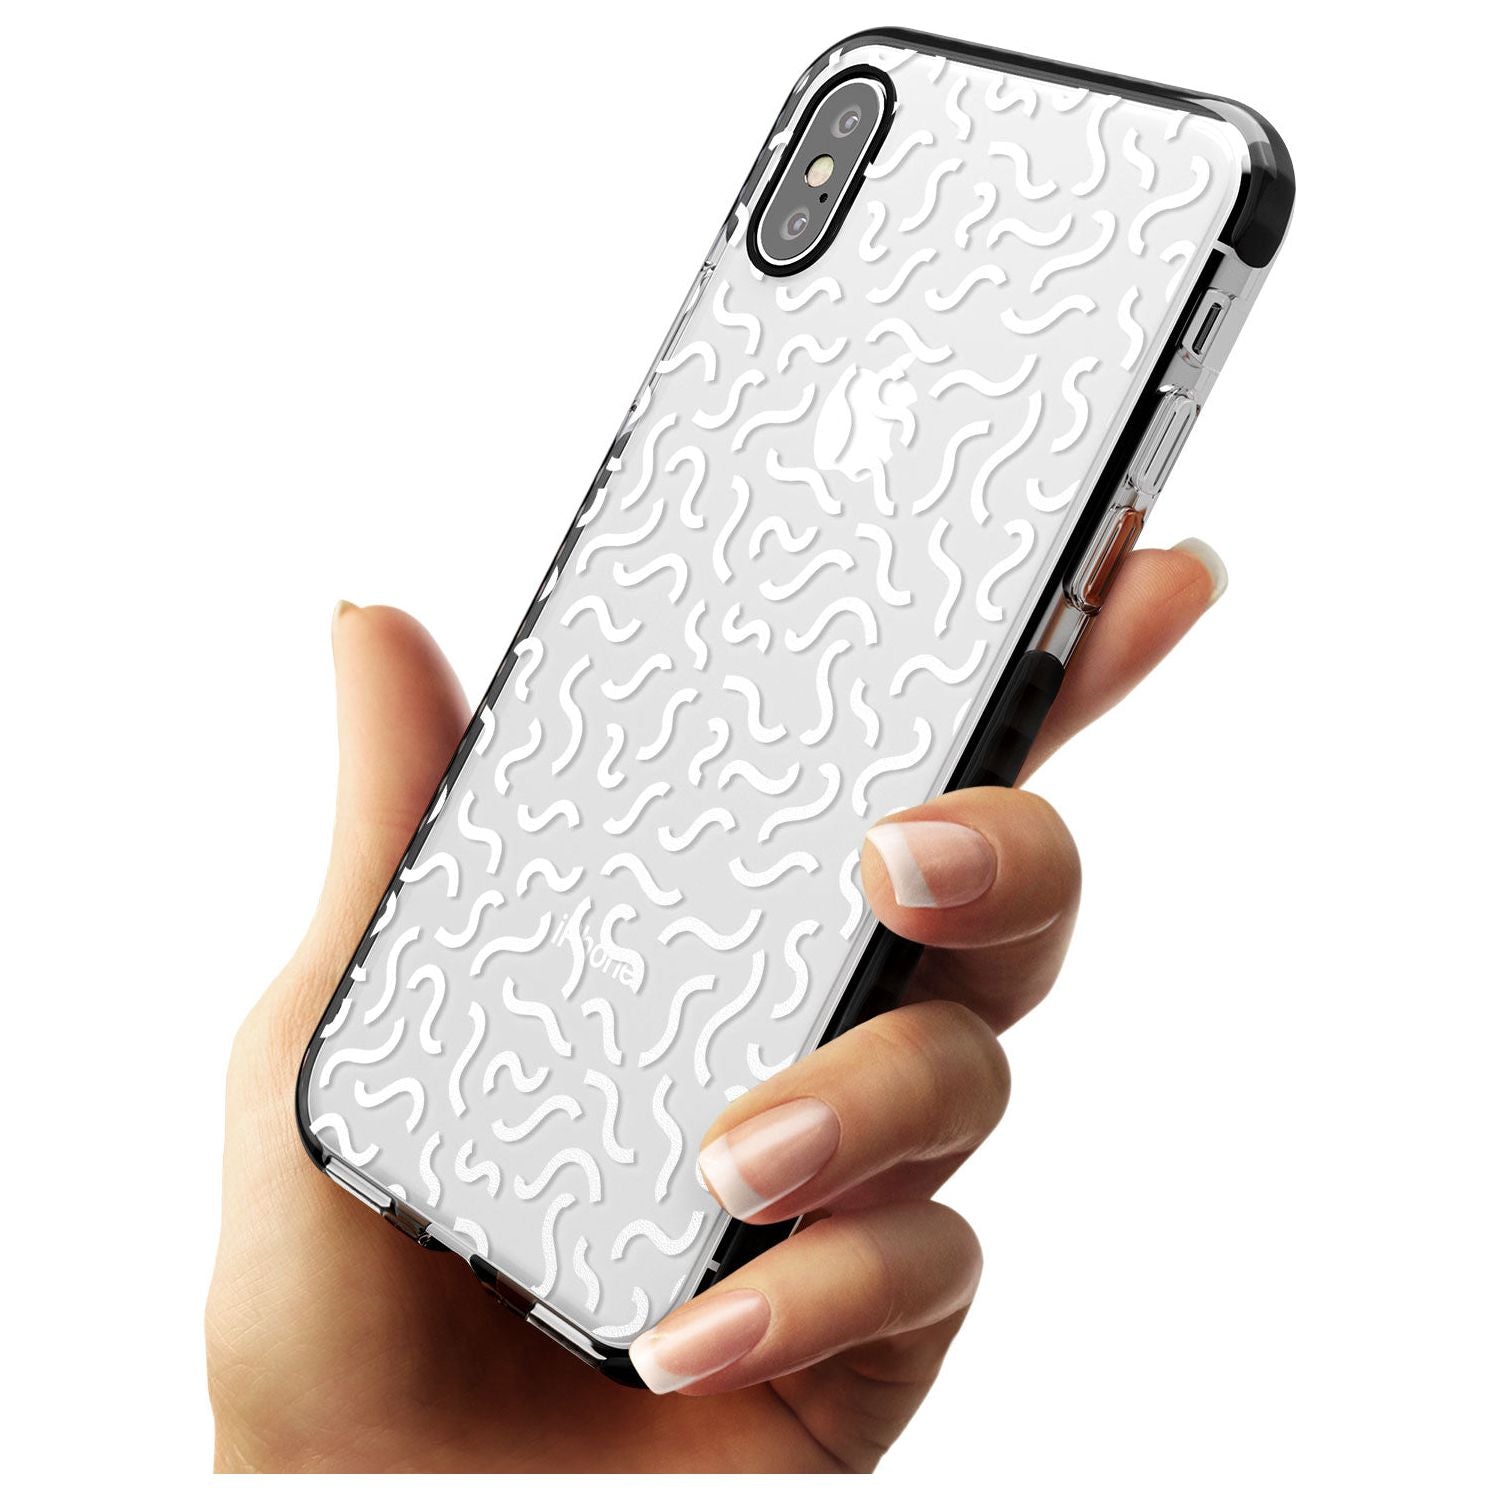 White Wavy Squiggles Memphis Retro Pattern Design Black Impact Phone Case for iPhone X XS Max XR